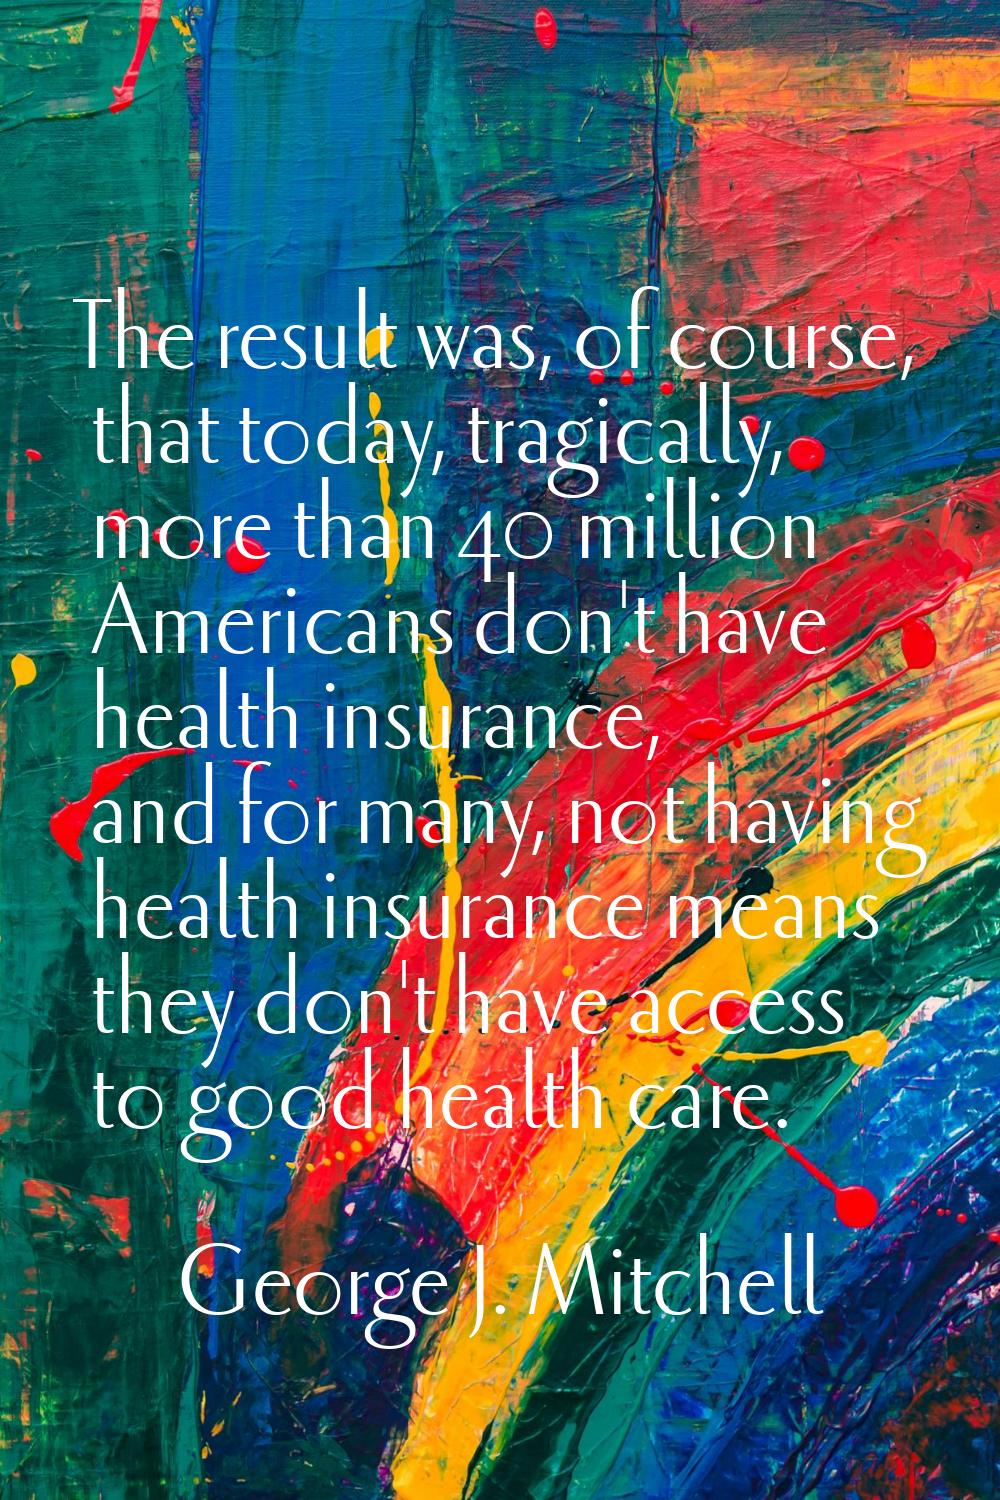 The result was, of course, that today, tragically, more than 40 million Americans don't have health